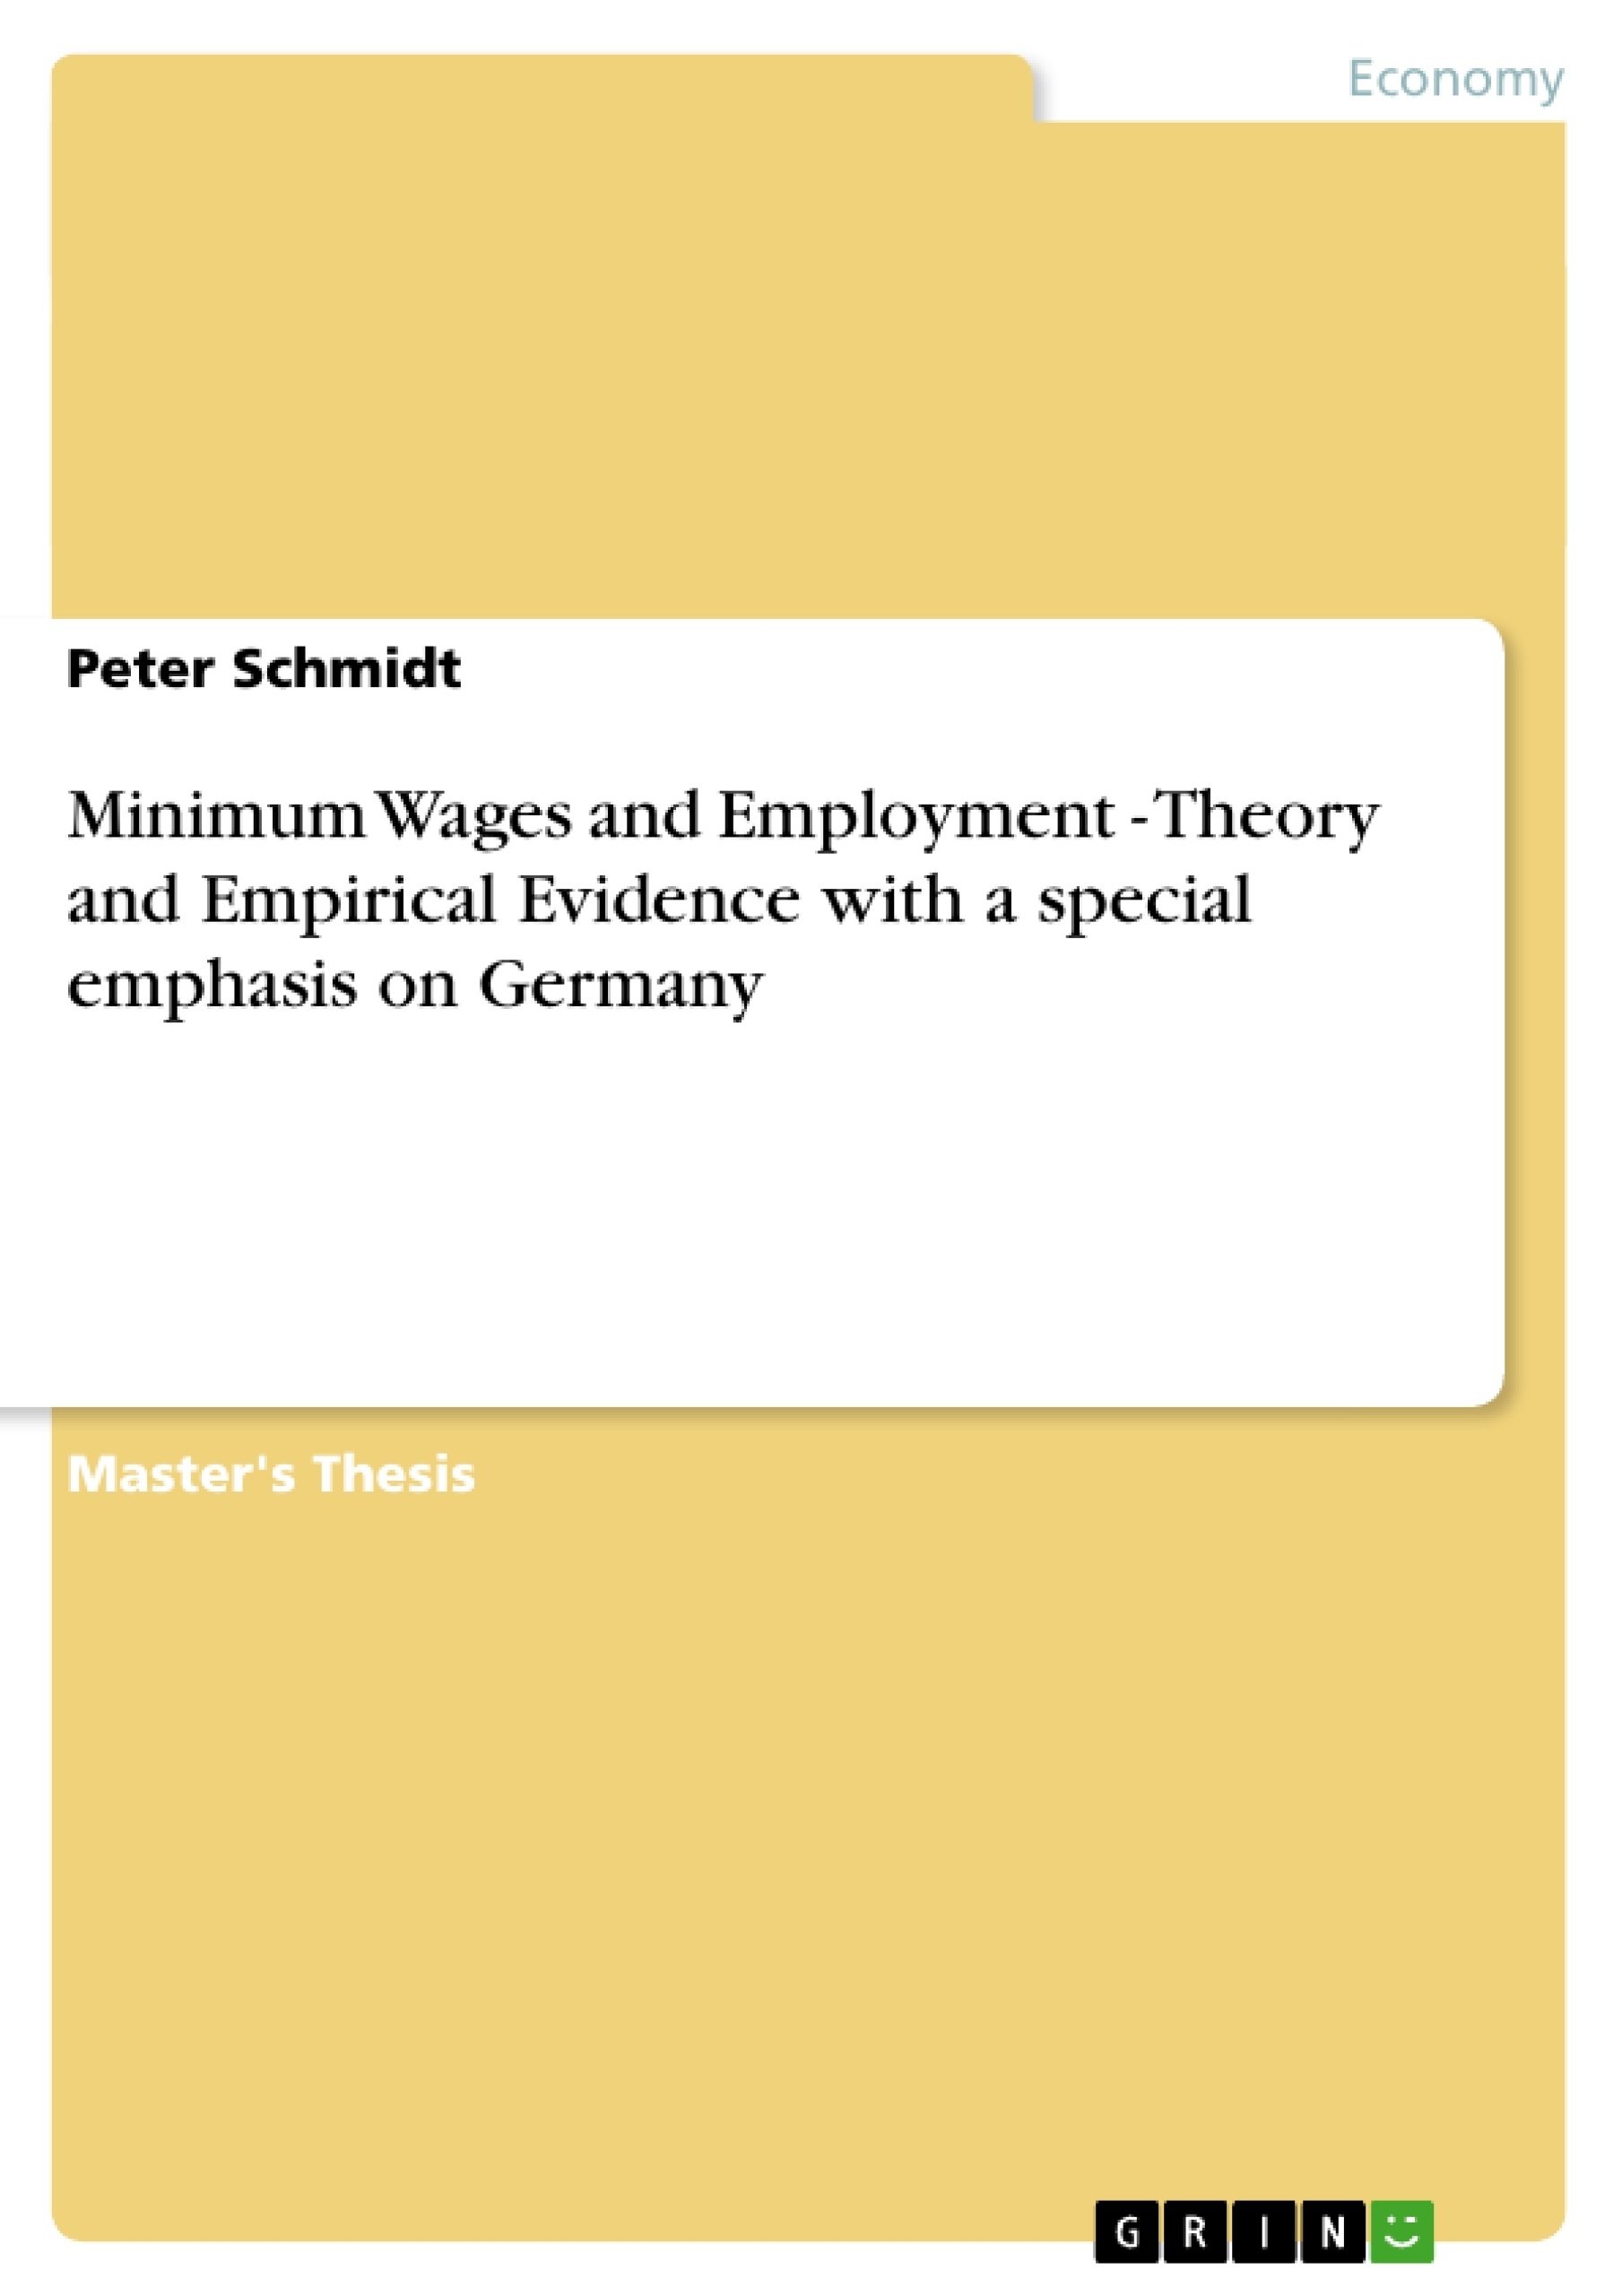 Title: Minimum Wages and Employment - Theory and Empirical Evidence with a special emphasis on Germany